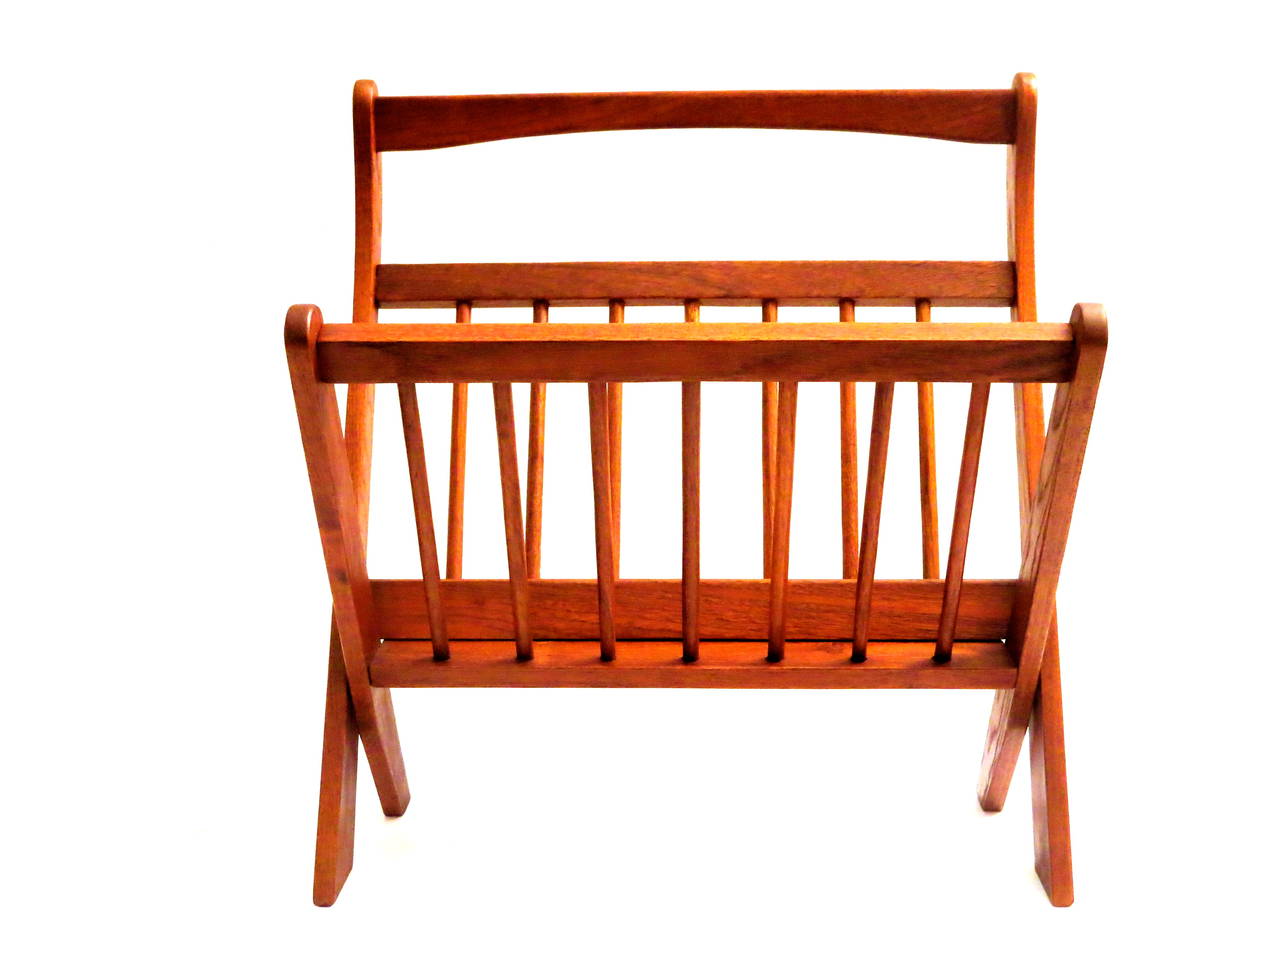 Simple elegant solid teak folding magazine rack , no nails used on this great craftsmanship piece , circa 1950s , refinished sanded and oiled in great condition. folds for easy storage.